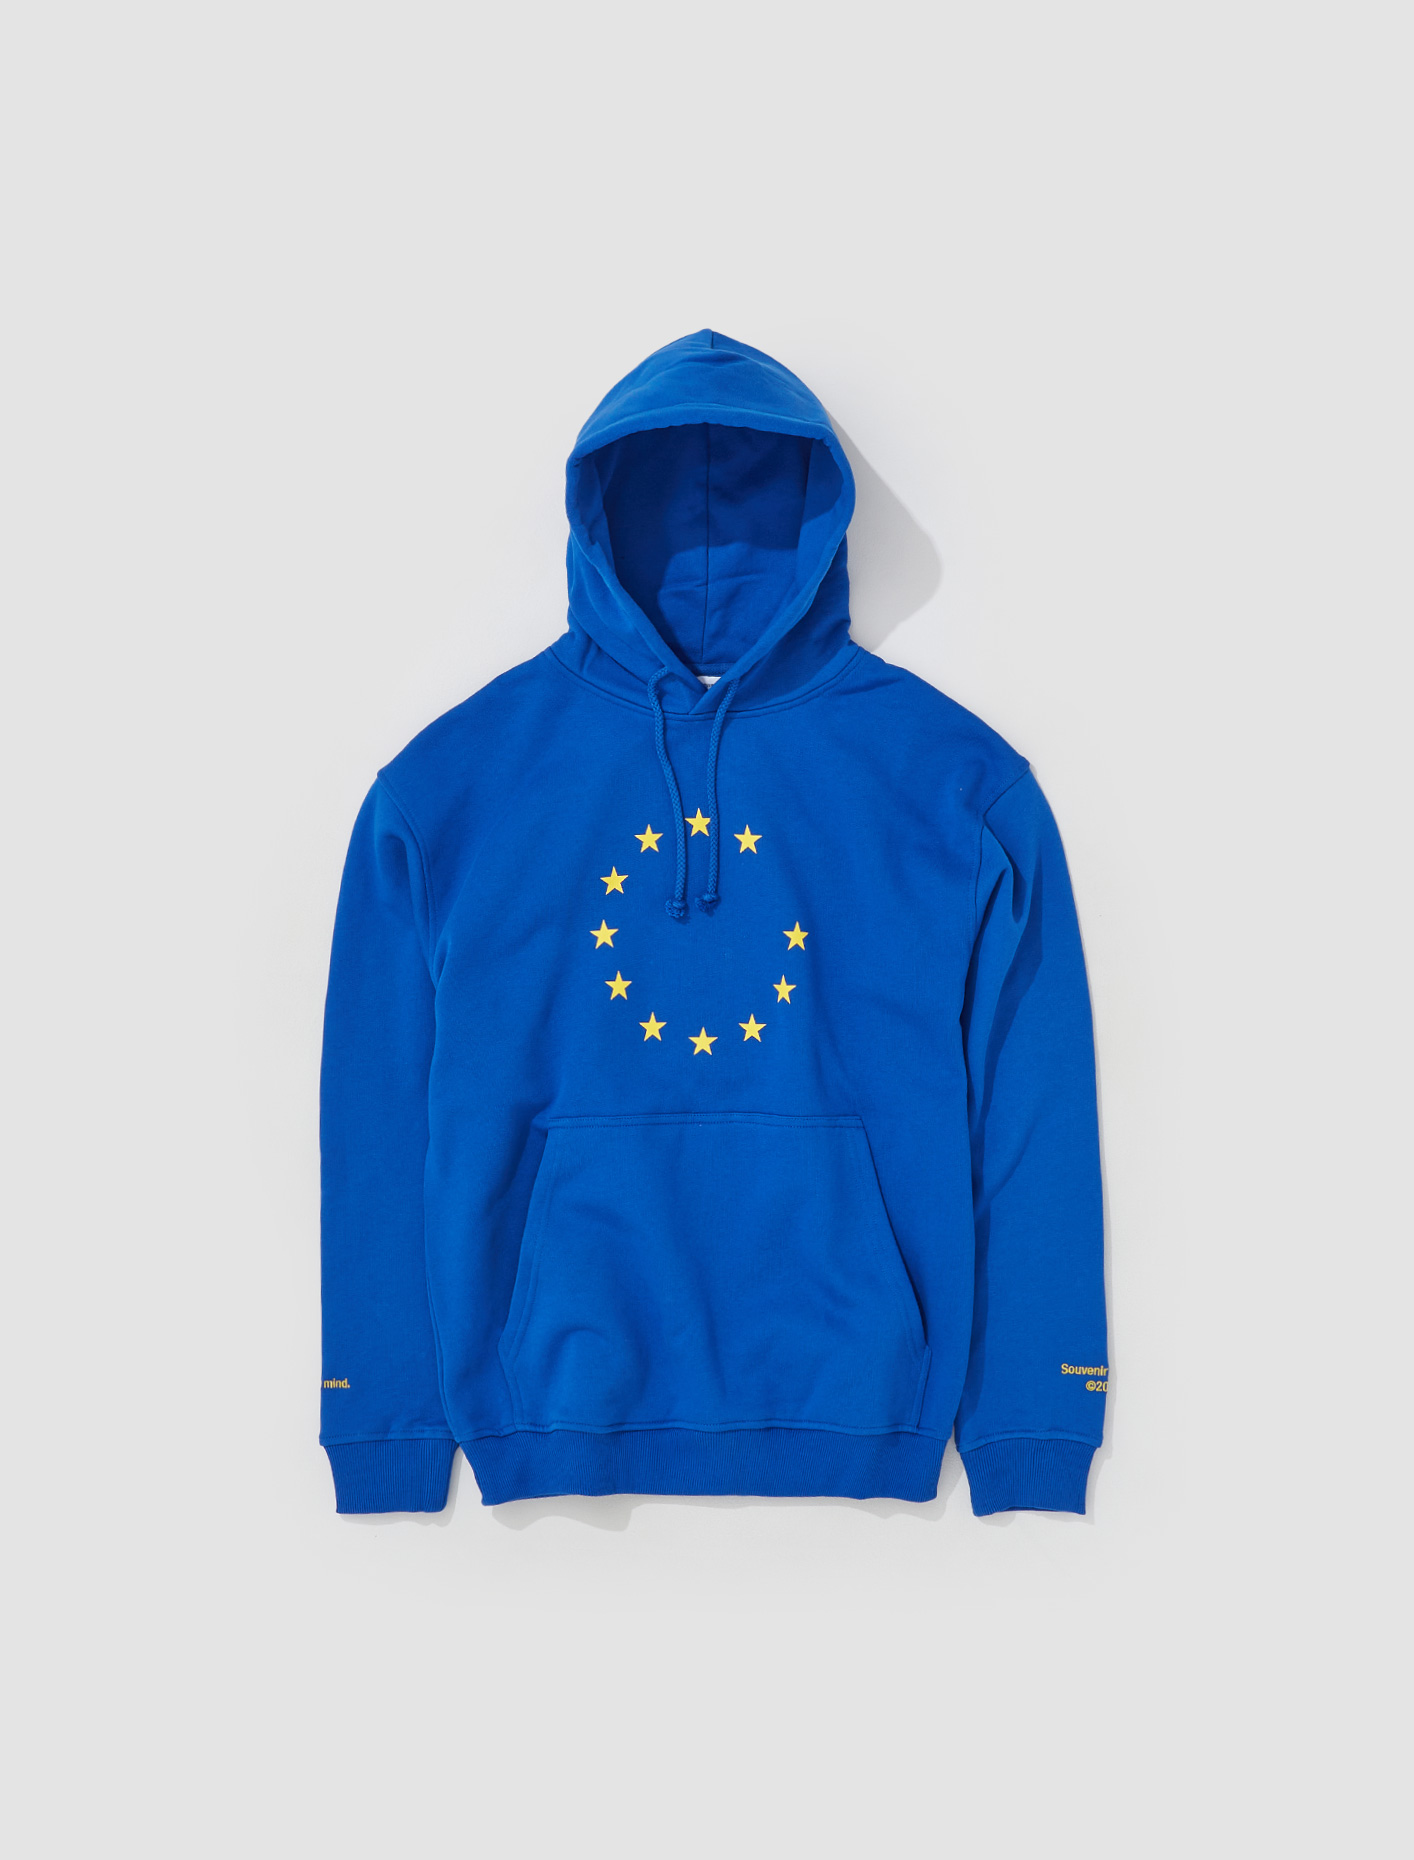 Souvenir Official Eunify Classic Hoodie 2022 in Blue | Voo Store Berlin |  Worldwide Shipping